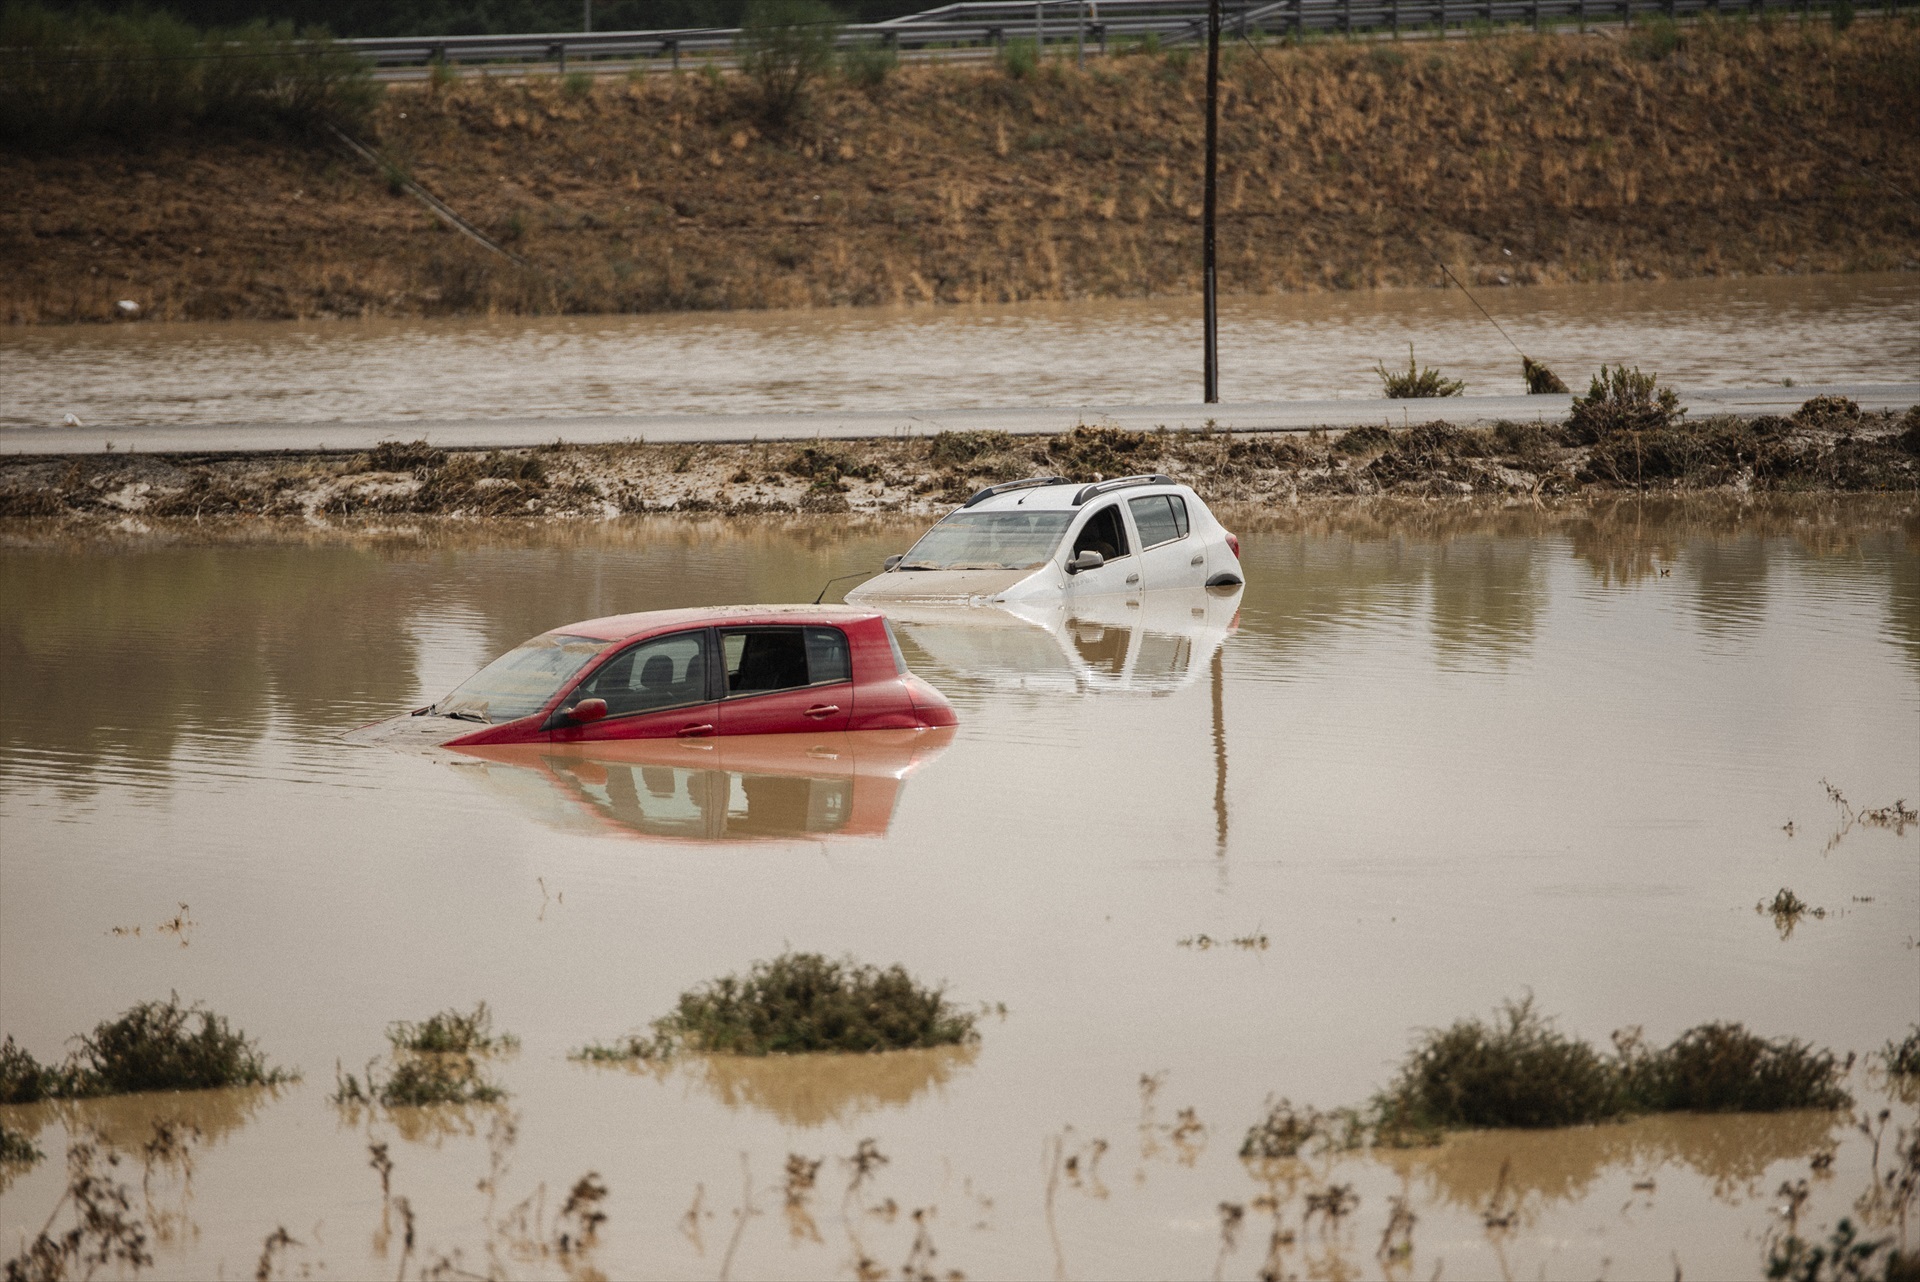 The passage of the DANA through Spain leaves floods, floods and numerous damages